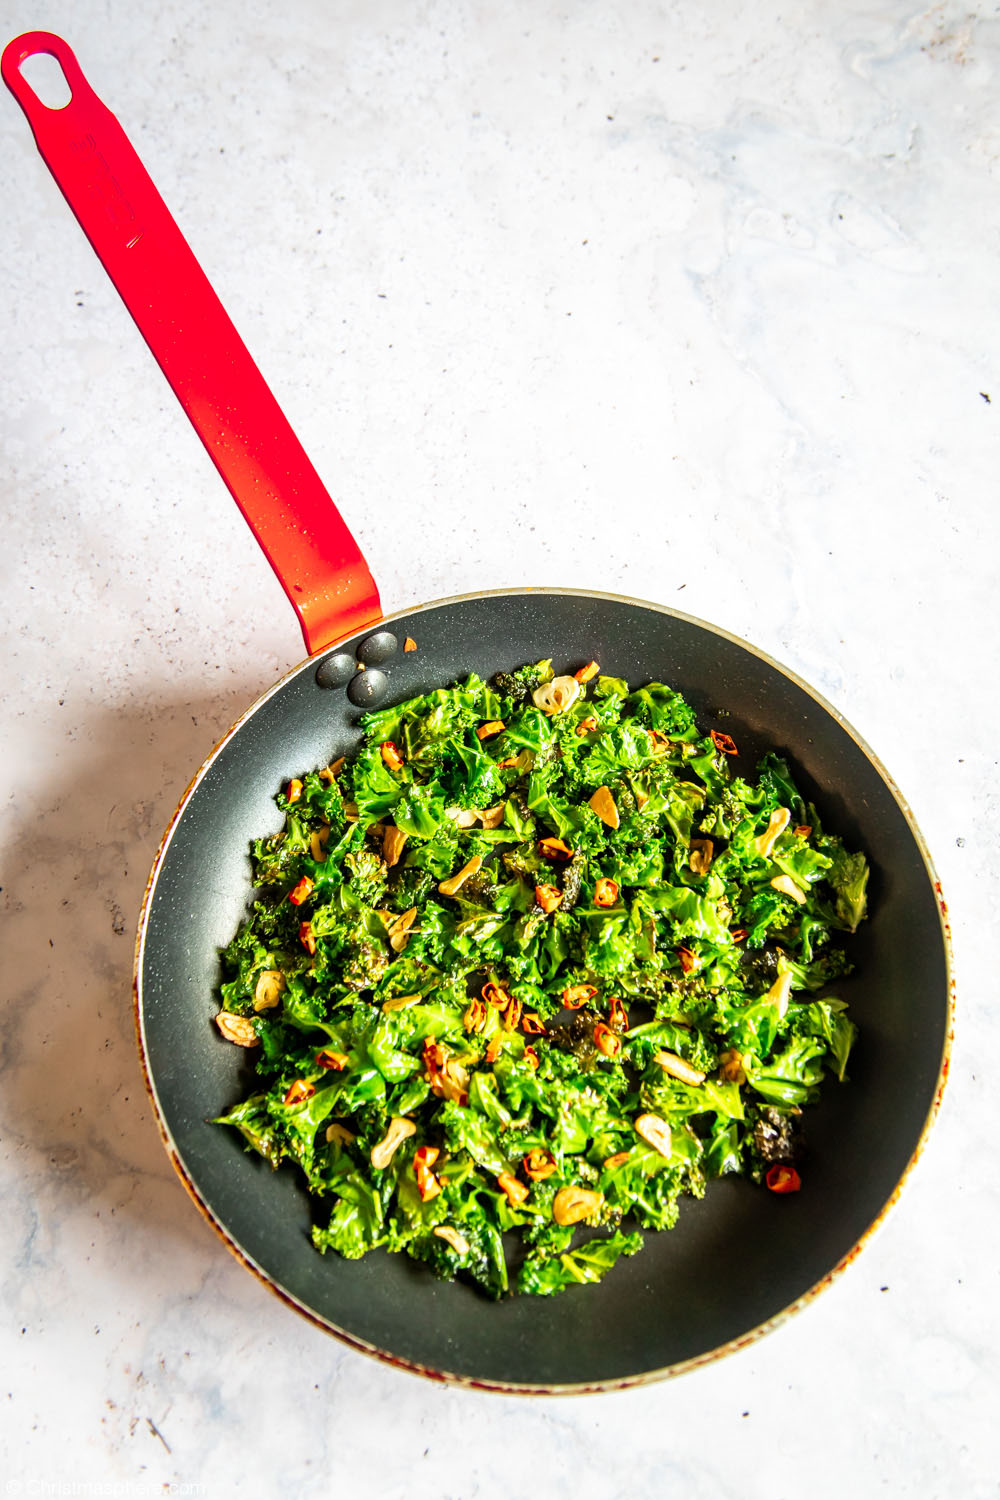 Garlic and Chilli Kale in a pan